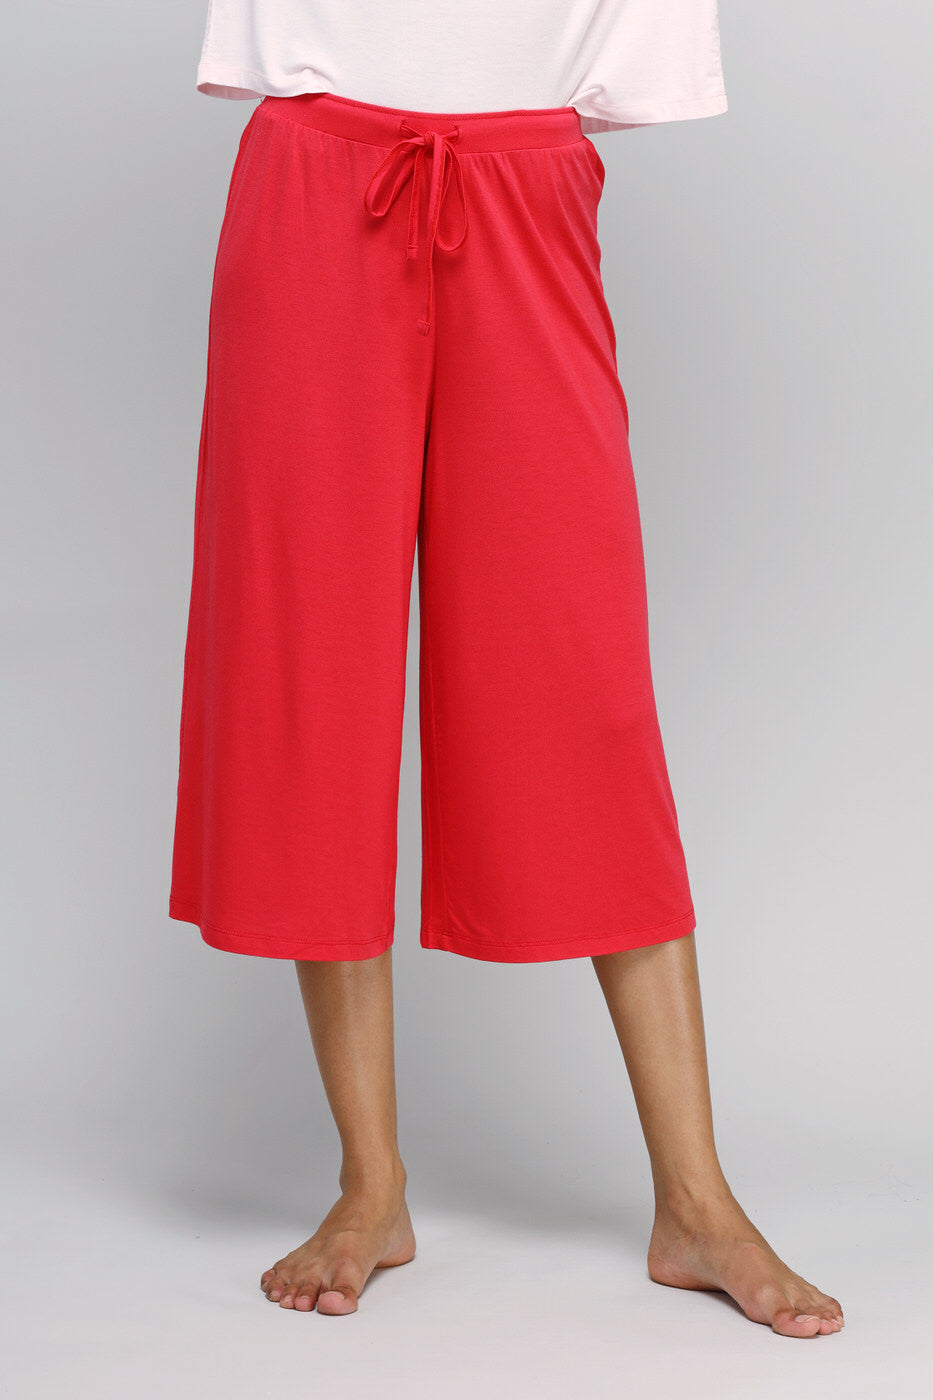 Love Red Culottes